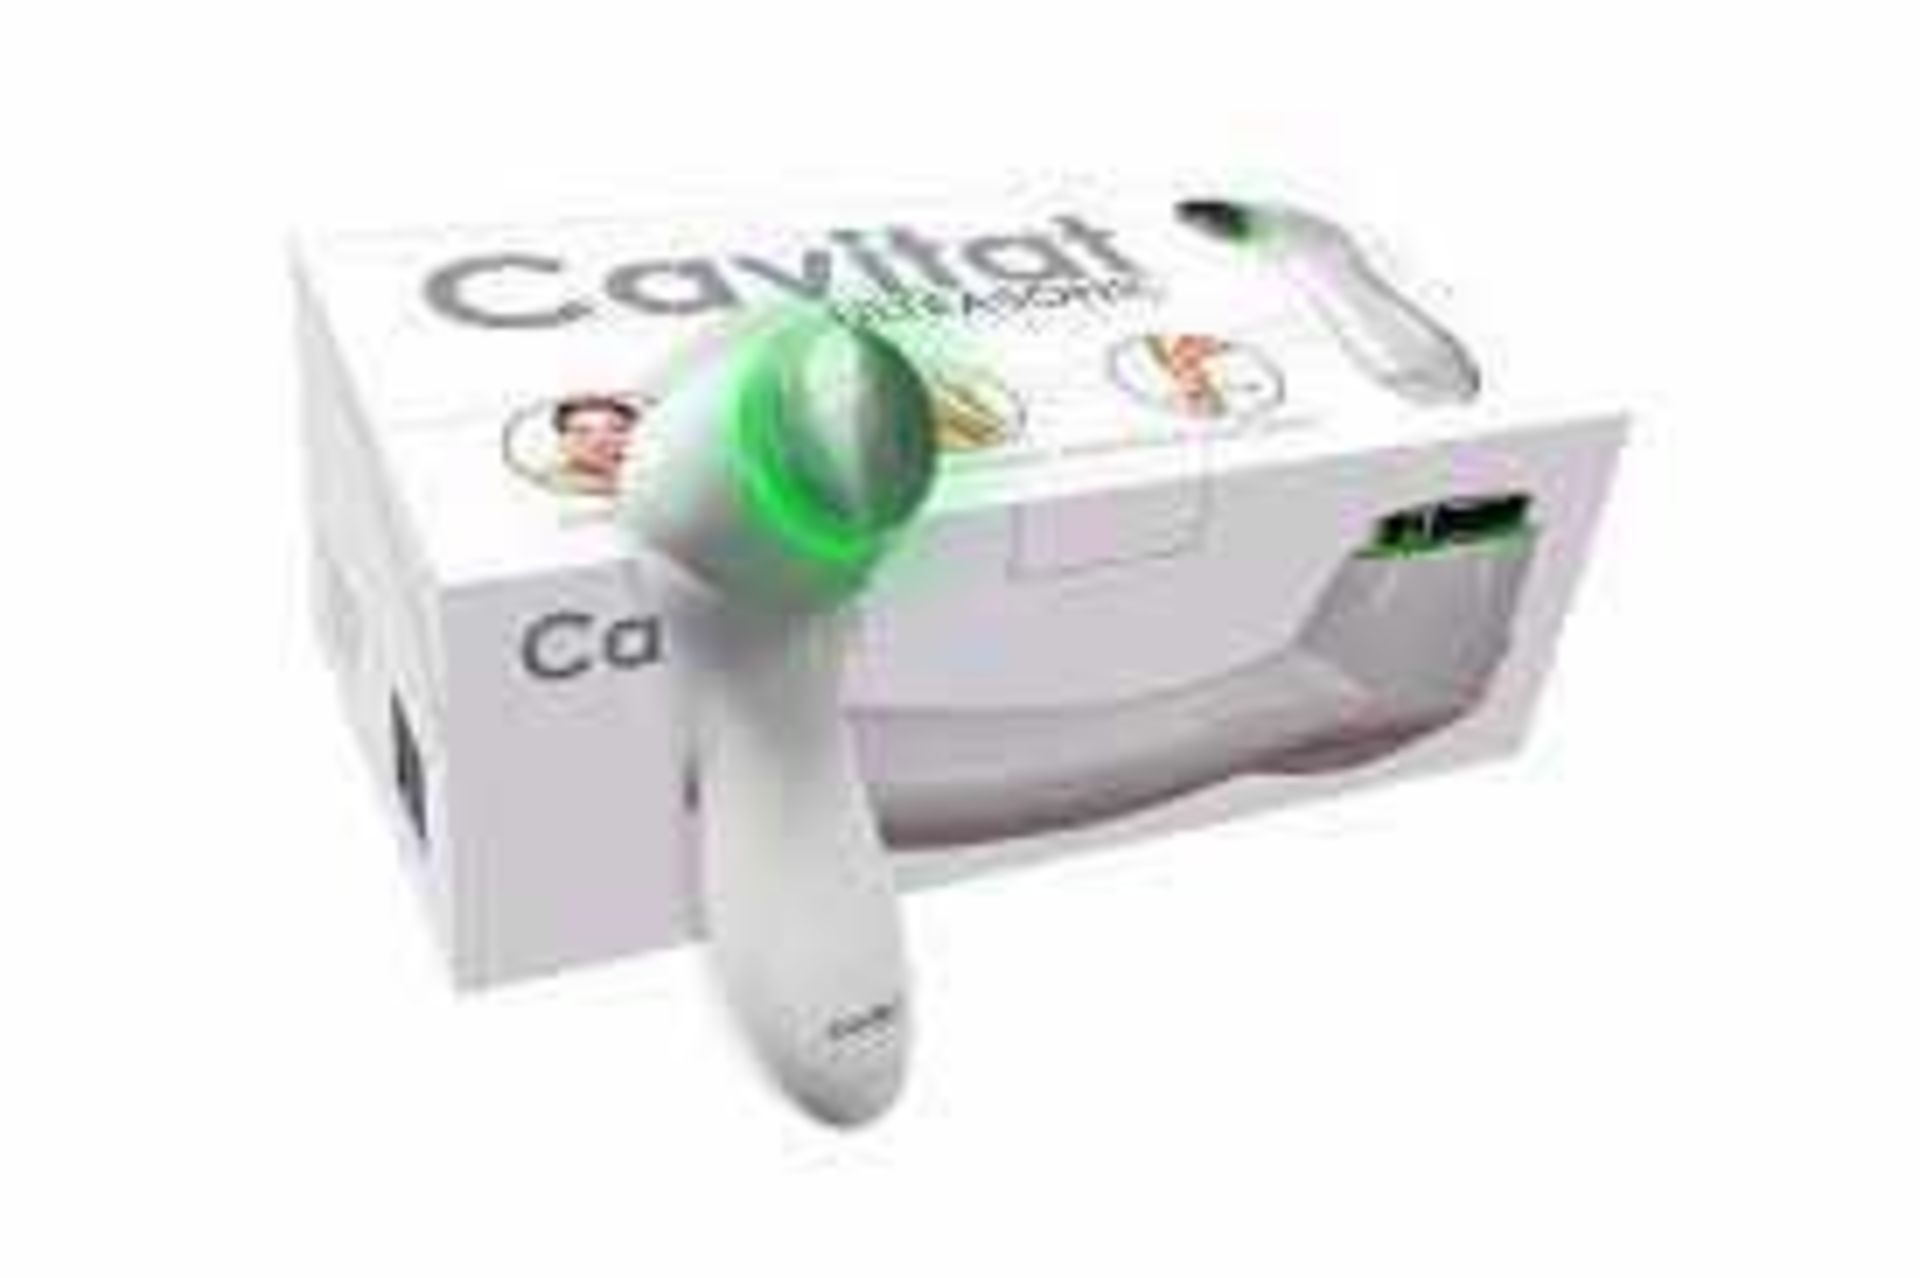 Combined RRP £160 Lot To Contain 2 Boxed Cavitat Ultrasonic Smoothing Beauty Treatment For Face And